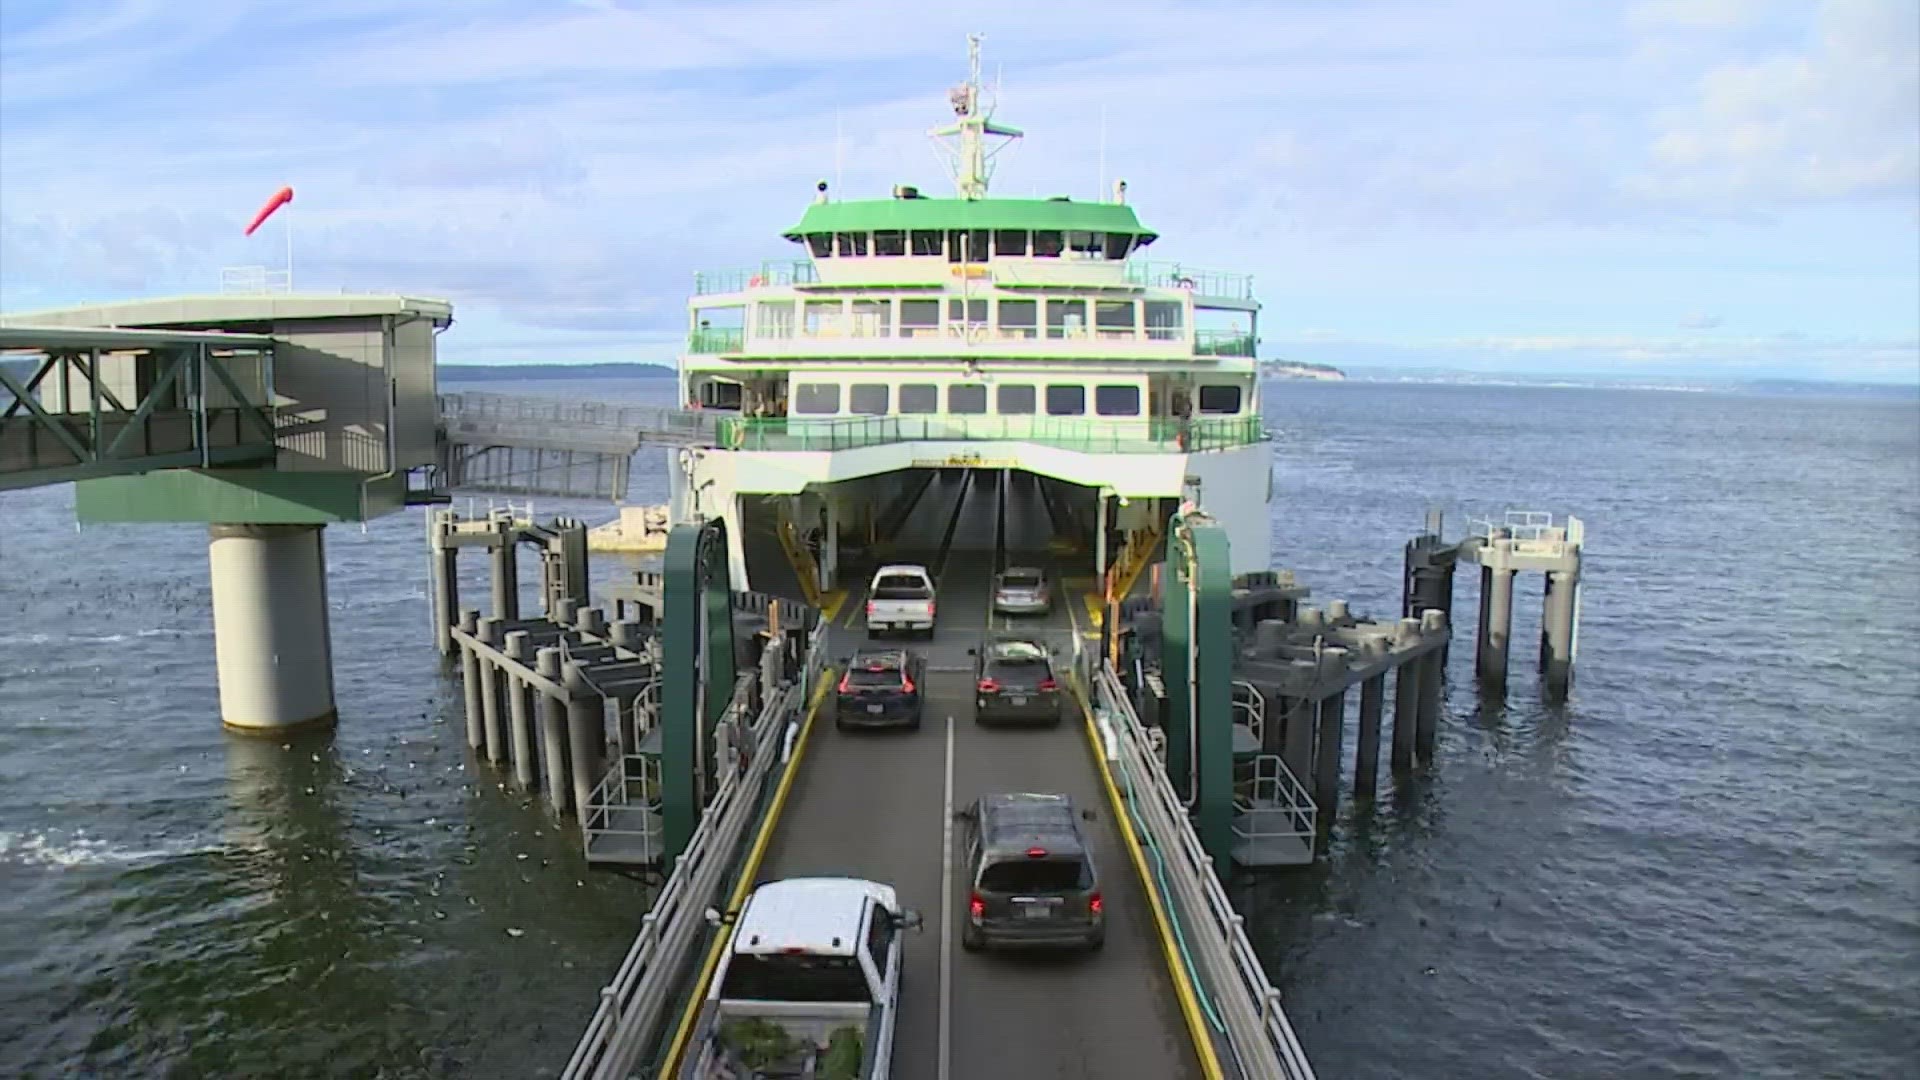 Travelers should brace themselves for long wait times, congestion and potential schedule cancellations as the WSF fleet is down one-third of all vessels.